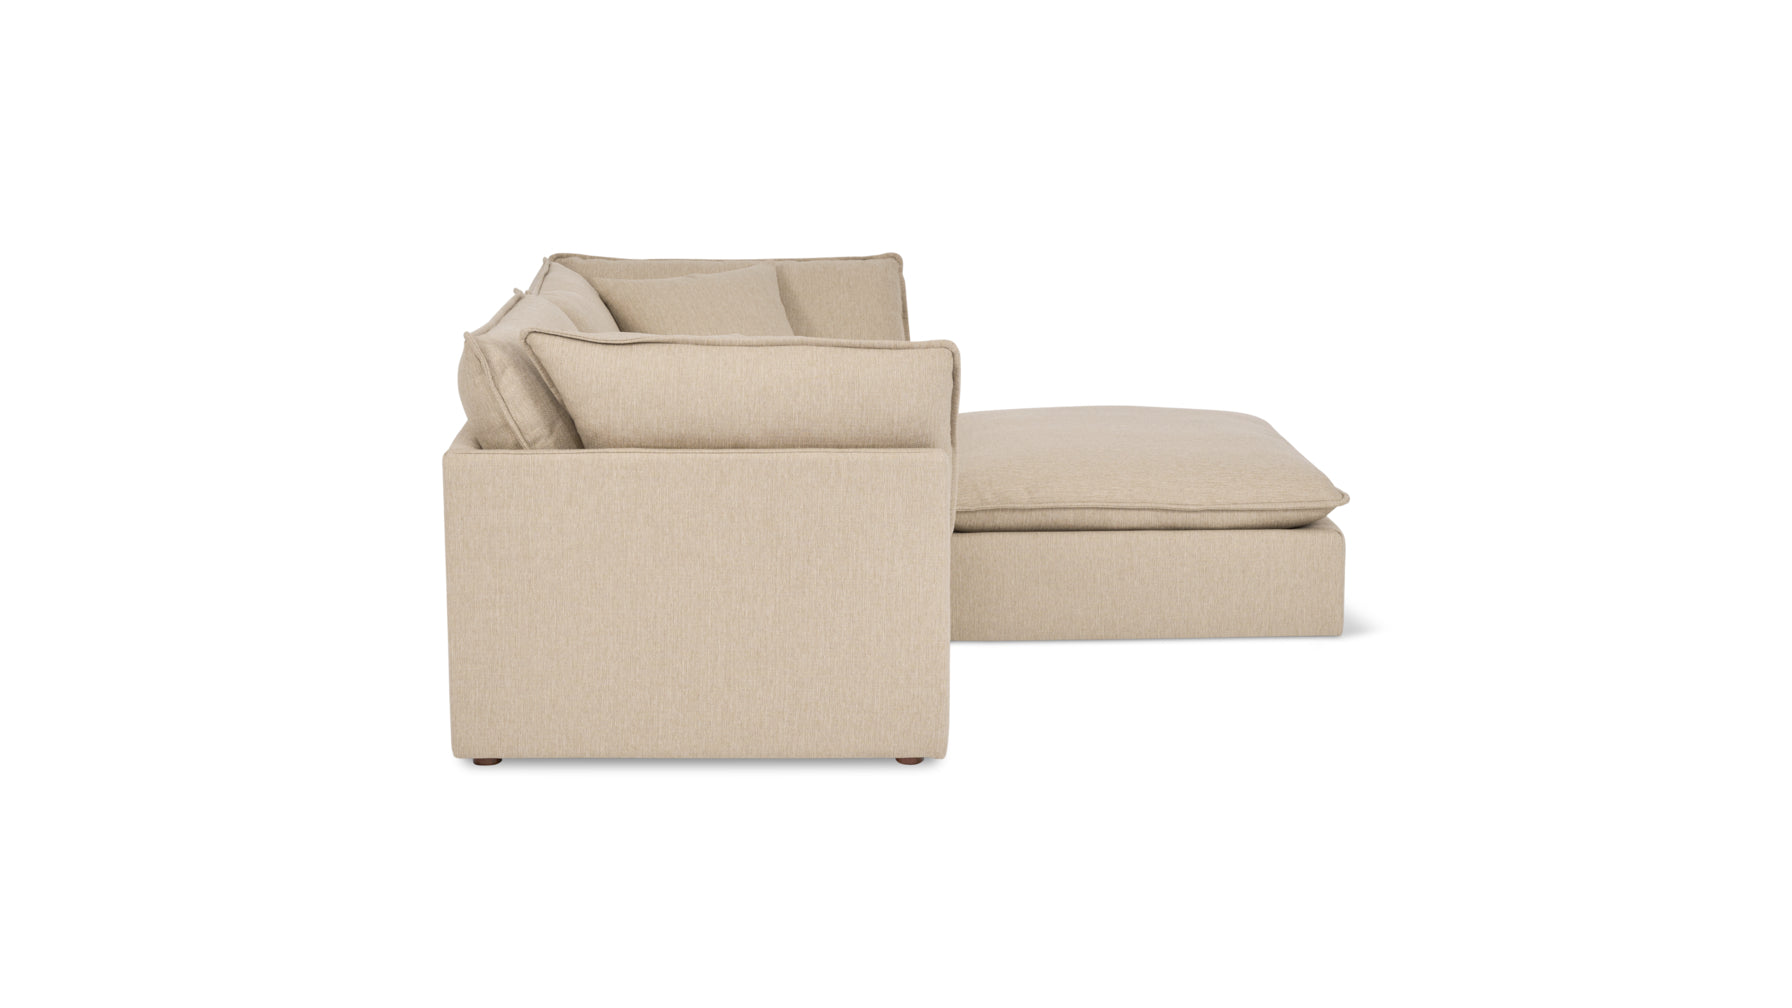 Chill Time 3-Piece Modular Sectional, Biscuit - Image 3